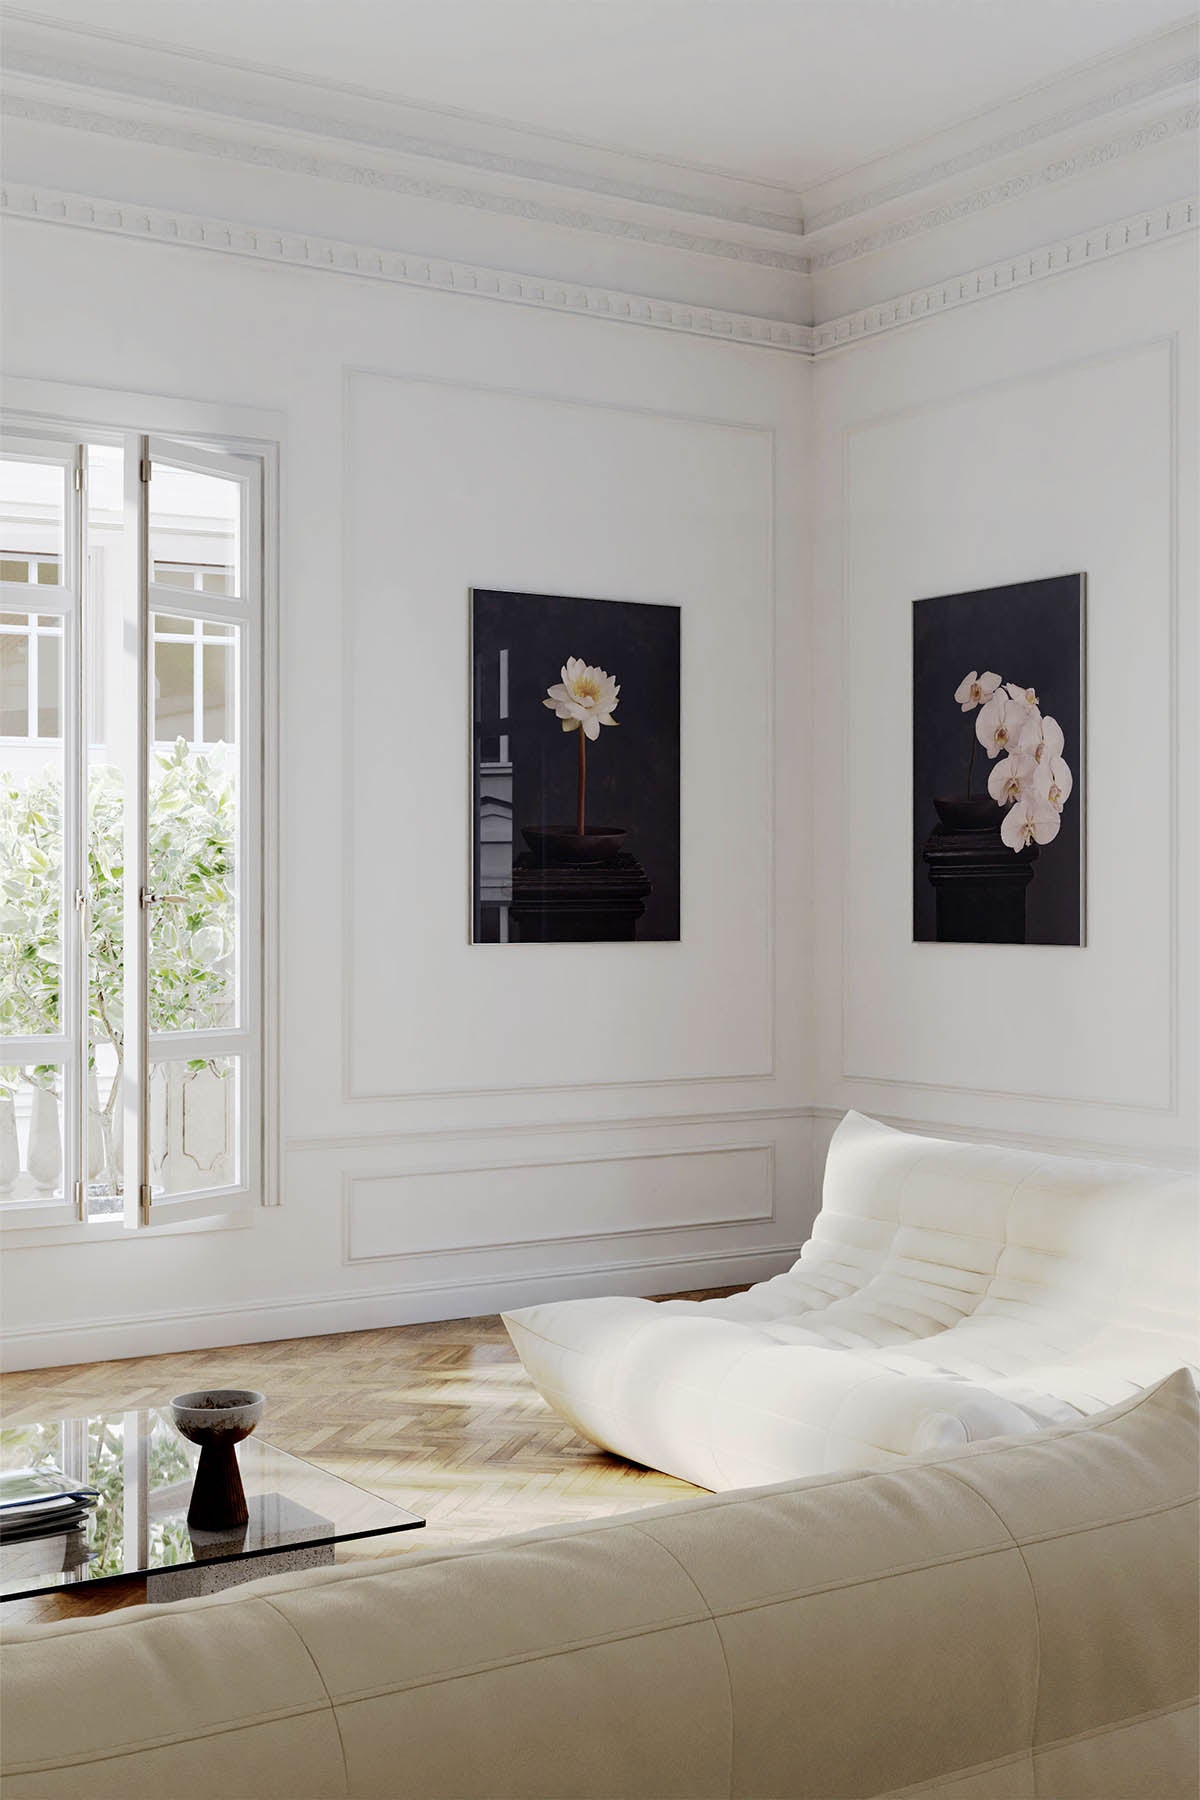 Fine Art Print Of A White Phaleanopsis Stem In A Black Bowl On A Black Mantle Next To An Art Print Of A Water Lily Stem In the same setting With Ling Roset Couches and a french balcony.